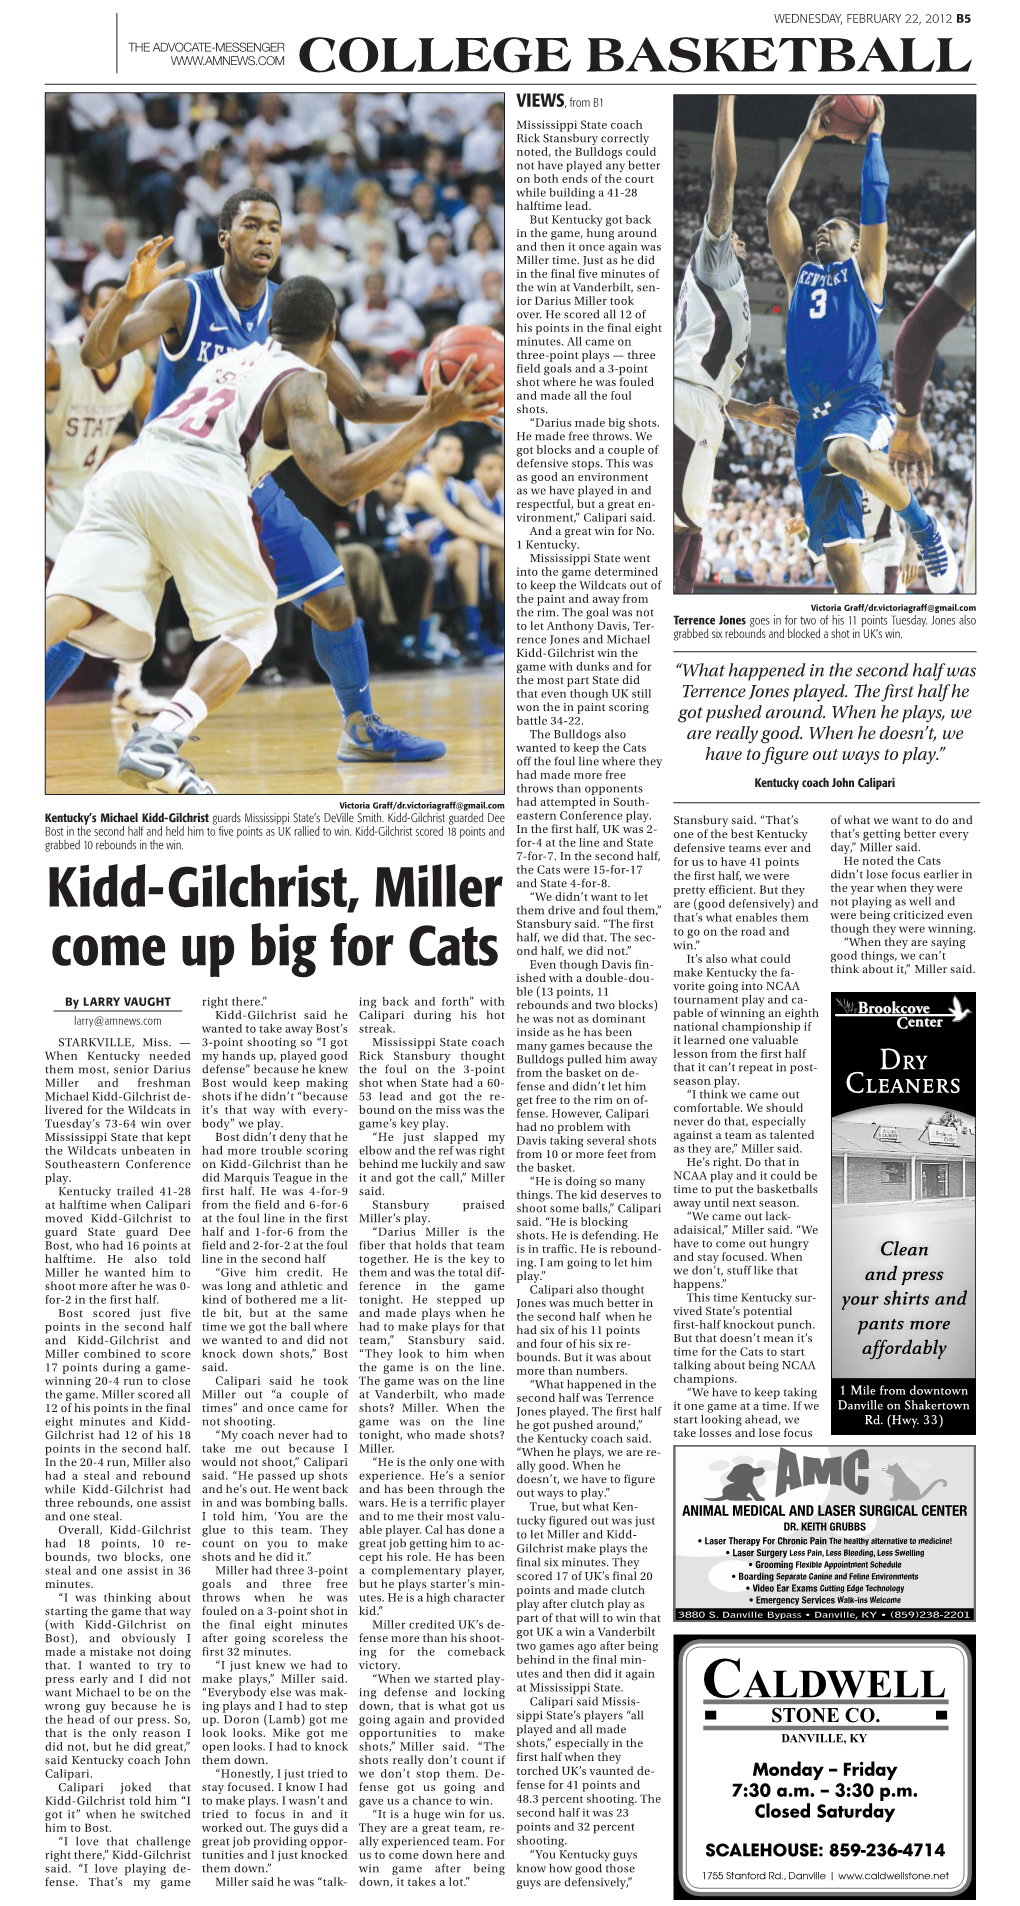 Kidd-Gilchrist, Miller Come up Big for Cats